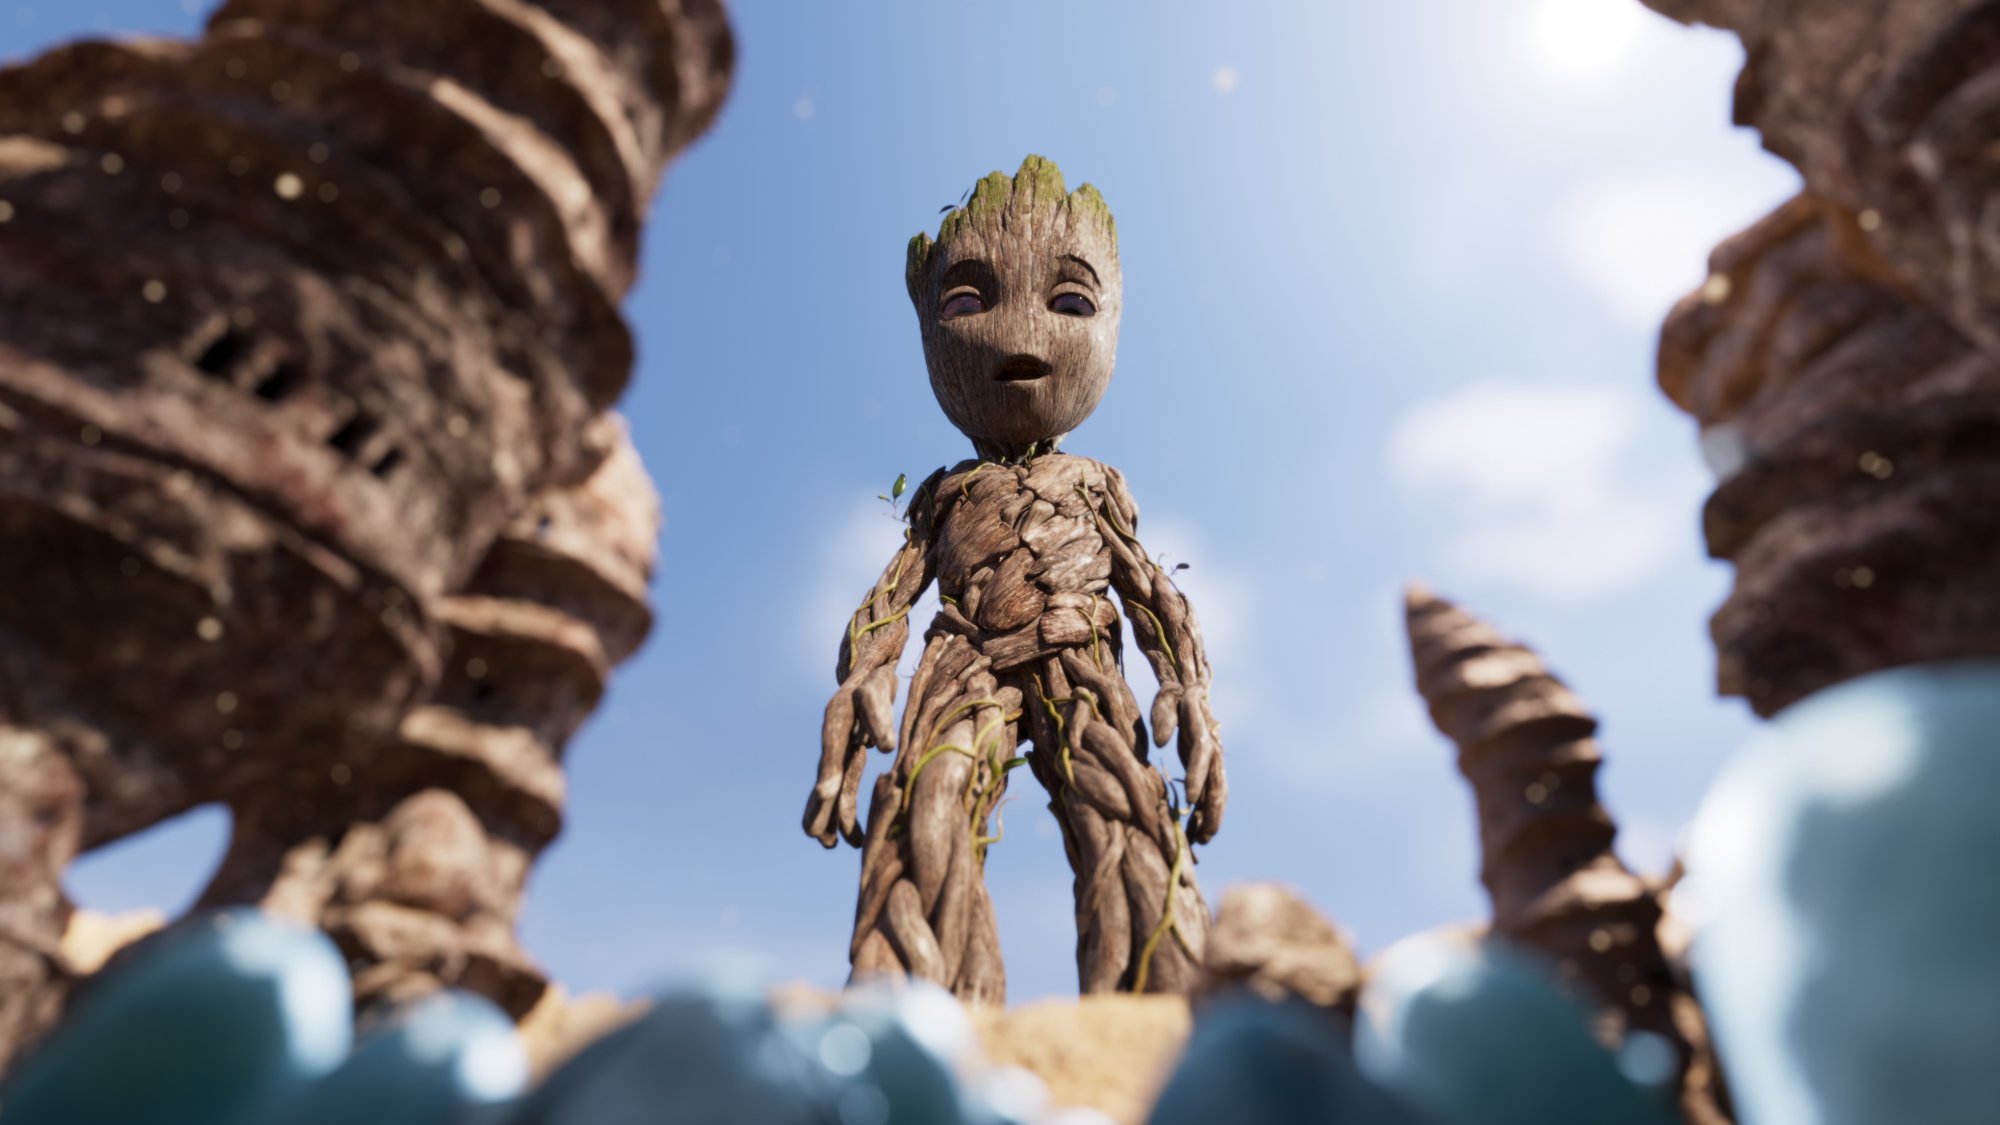 Baby Groot in 'The Little Guy' for our ranking of Marvel's 'I Am Groot' shorts. The image shows Groot towering over a bunch of small blue creatures and smiling.